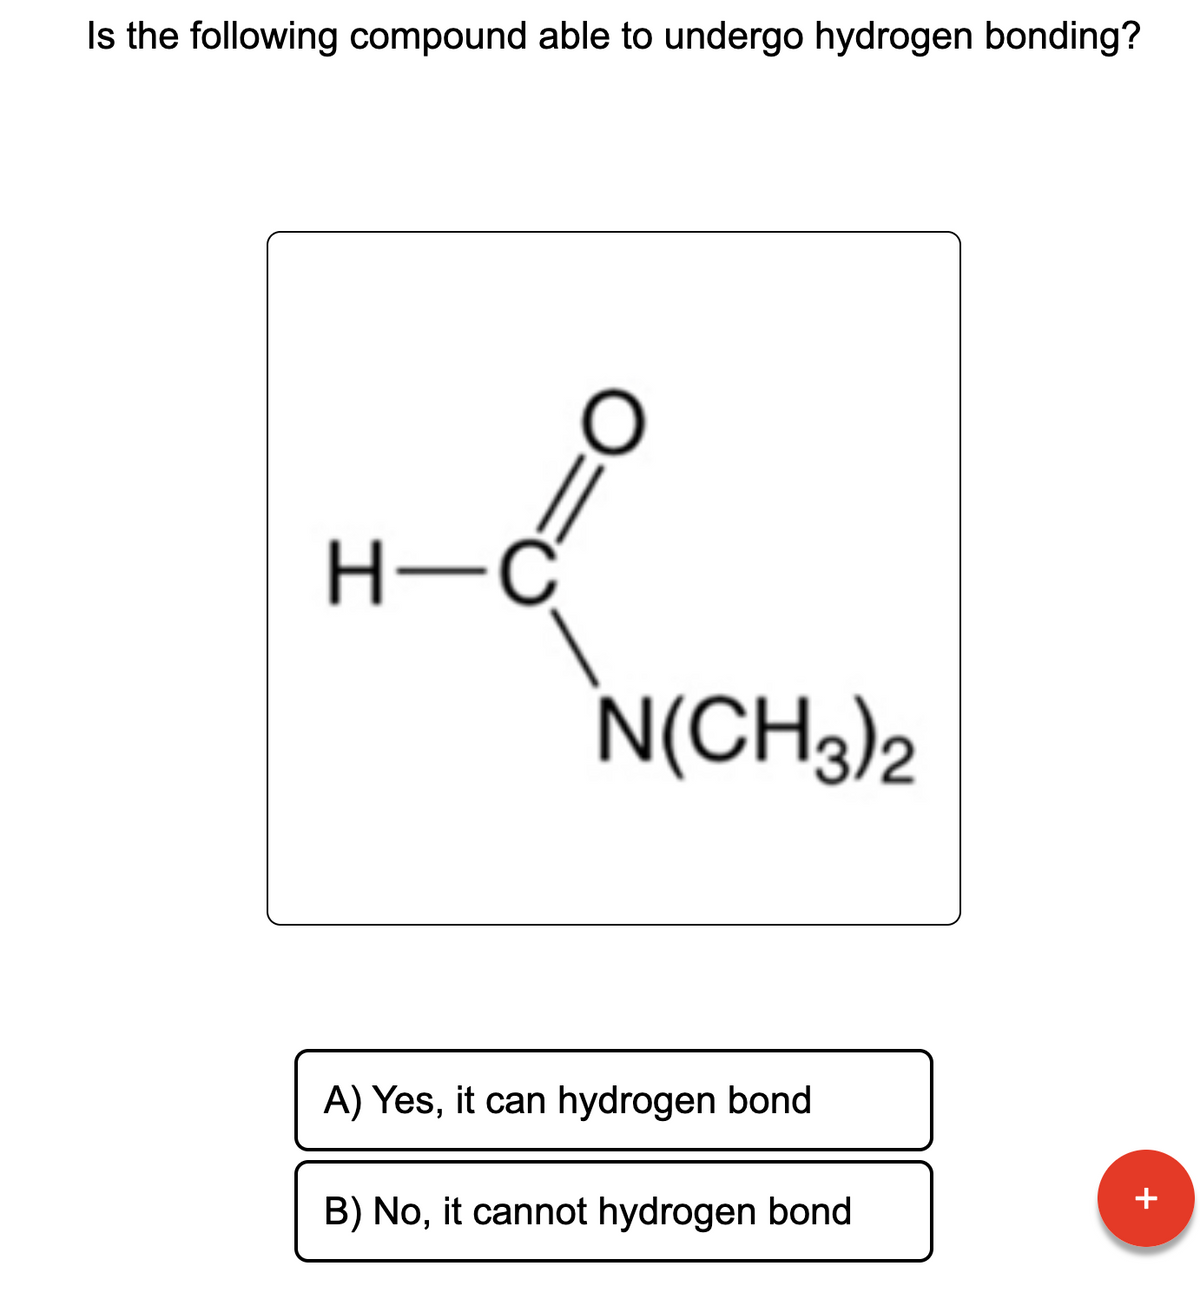 Is the following compound able to undergo hydrogen bonding?
ď
H-C
O
N(CH3)2
A) Yes, it can hydrogen bond
B) No, it cannot hydrogen bond
+